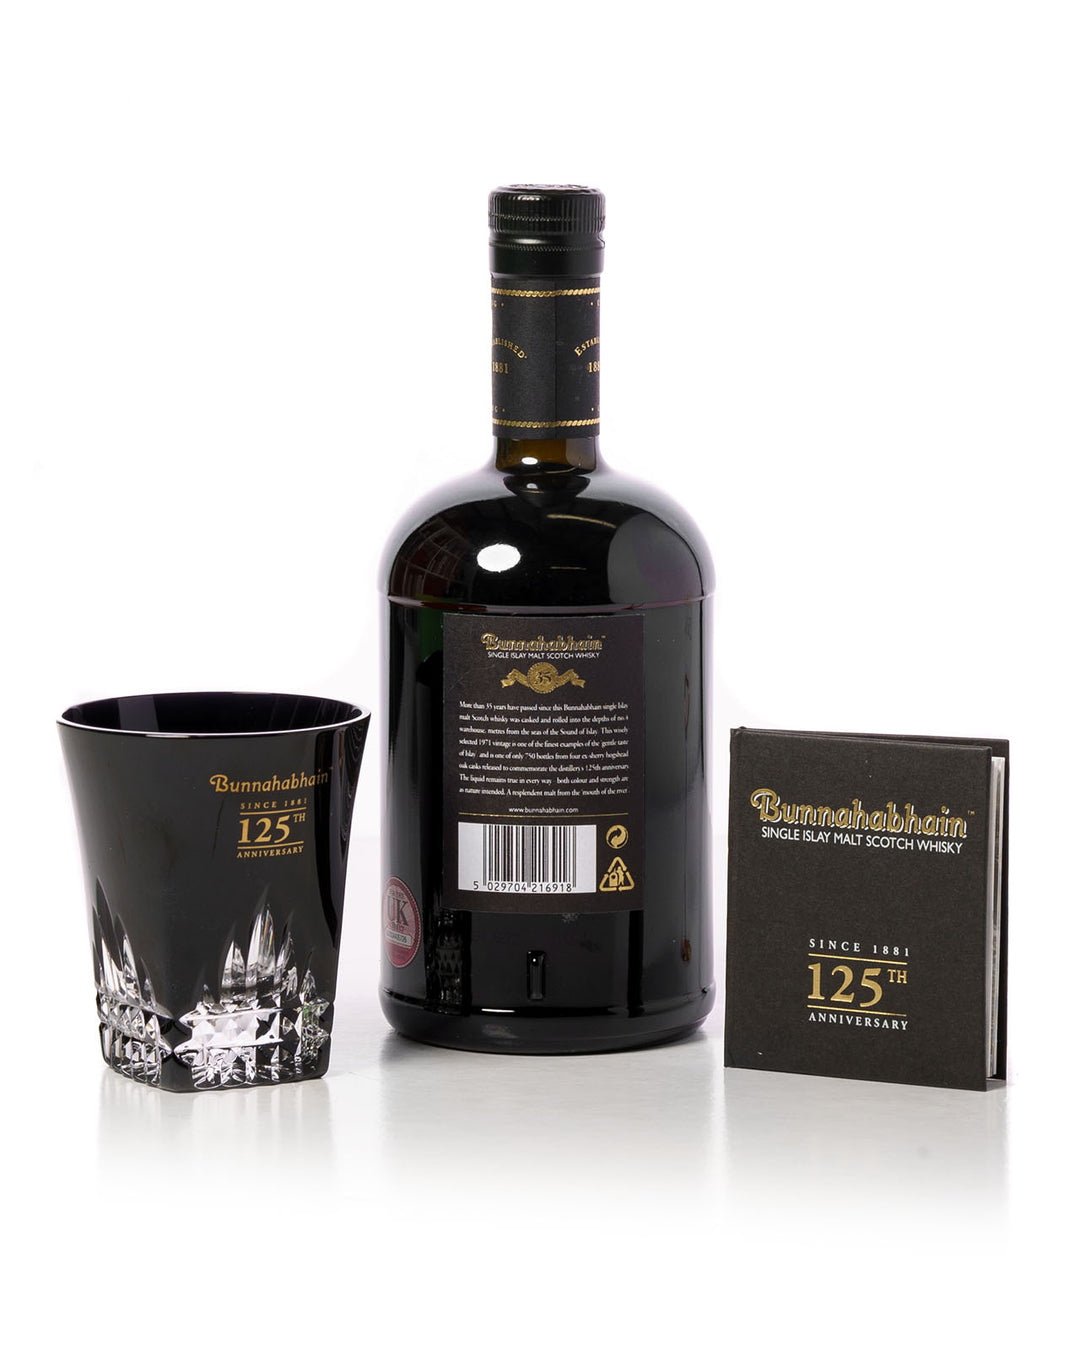 Bunnahabhain 1971 35 Year Old 125th Anniversary Bottled 2006 With Original Box and Glass